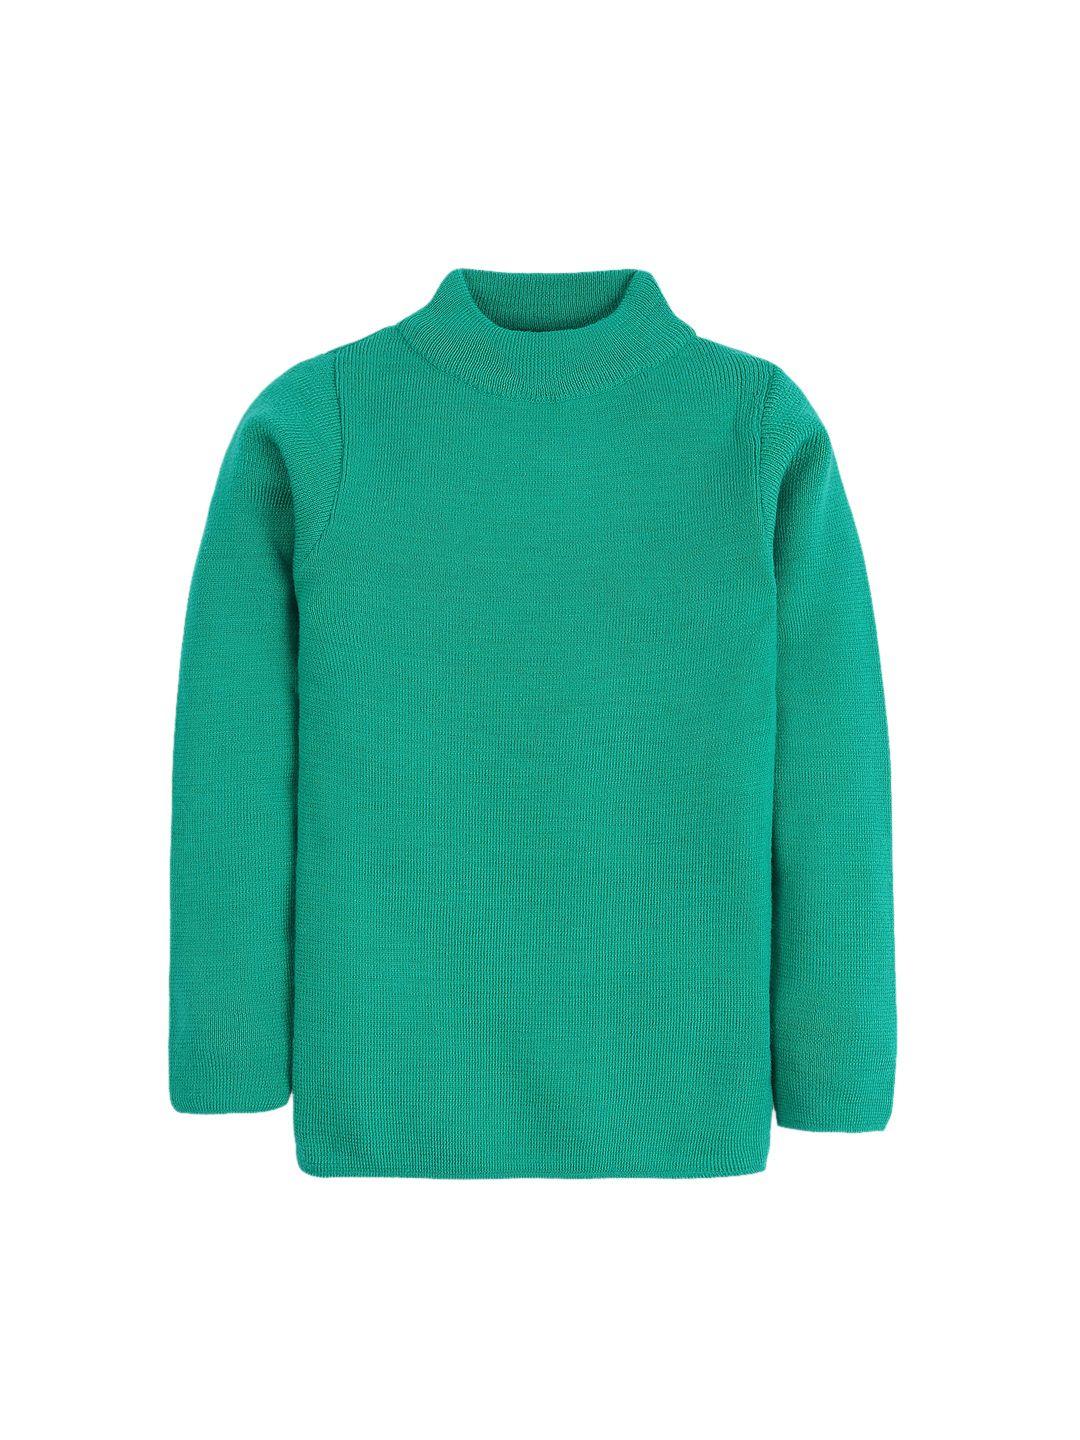 rvk unisex green solid pullover sweater